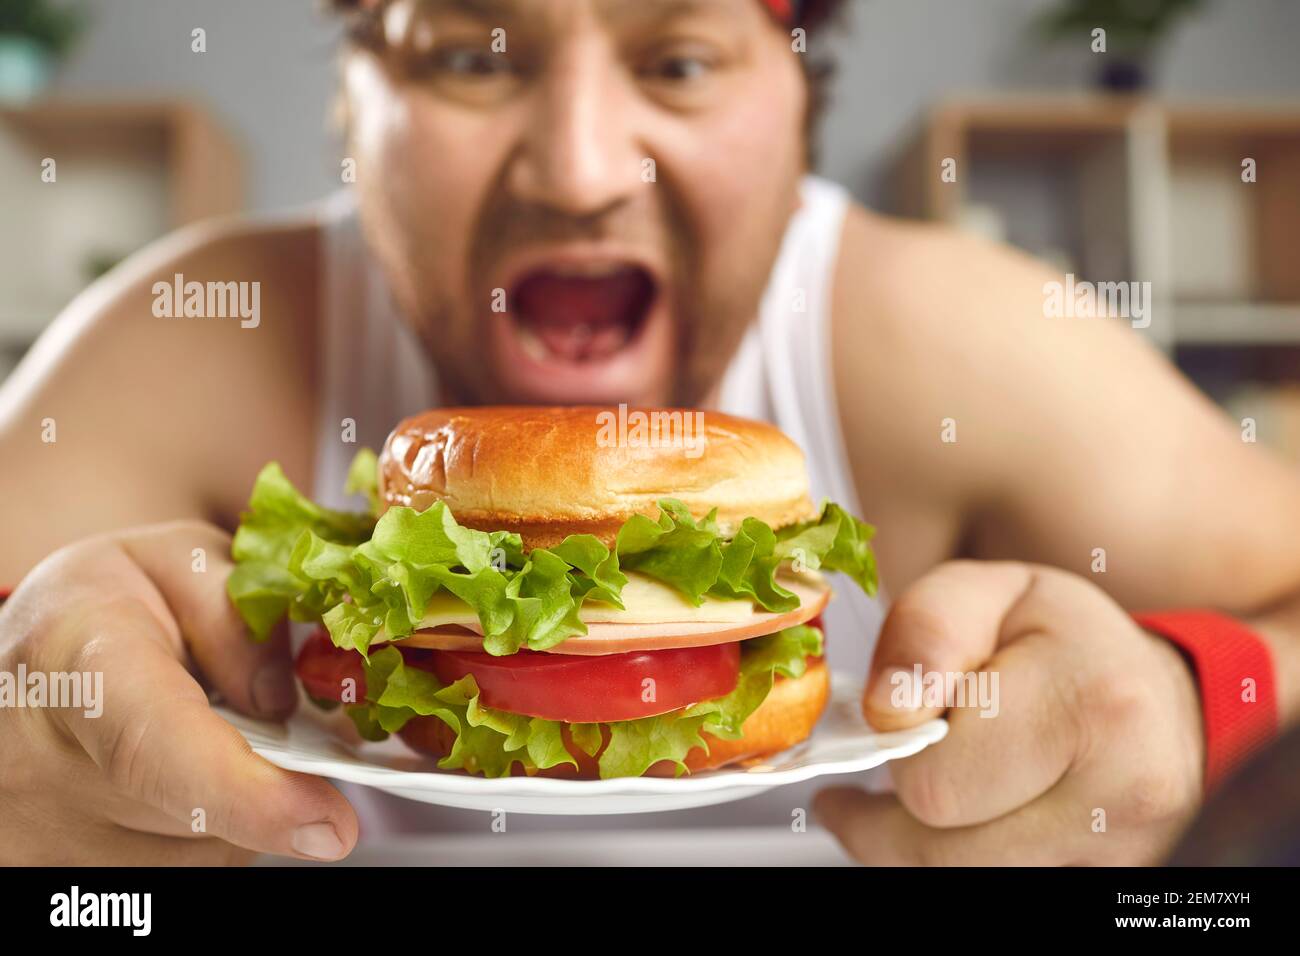 Funny man who failed his diet enjoying fast food and eating big delicious burger Stock Photo